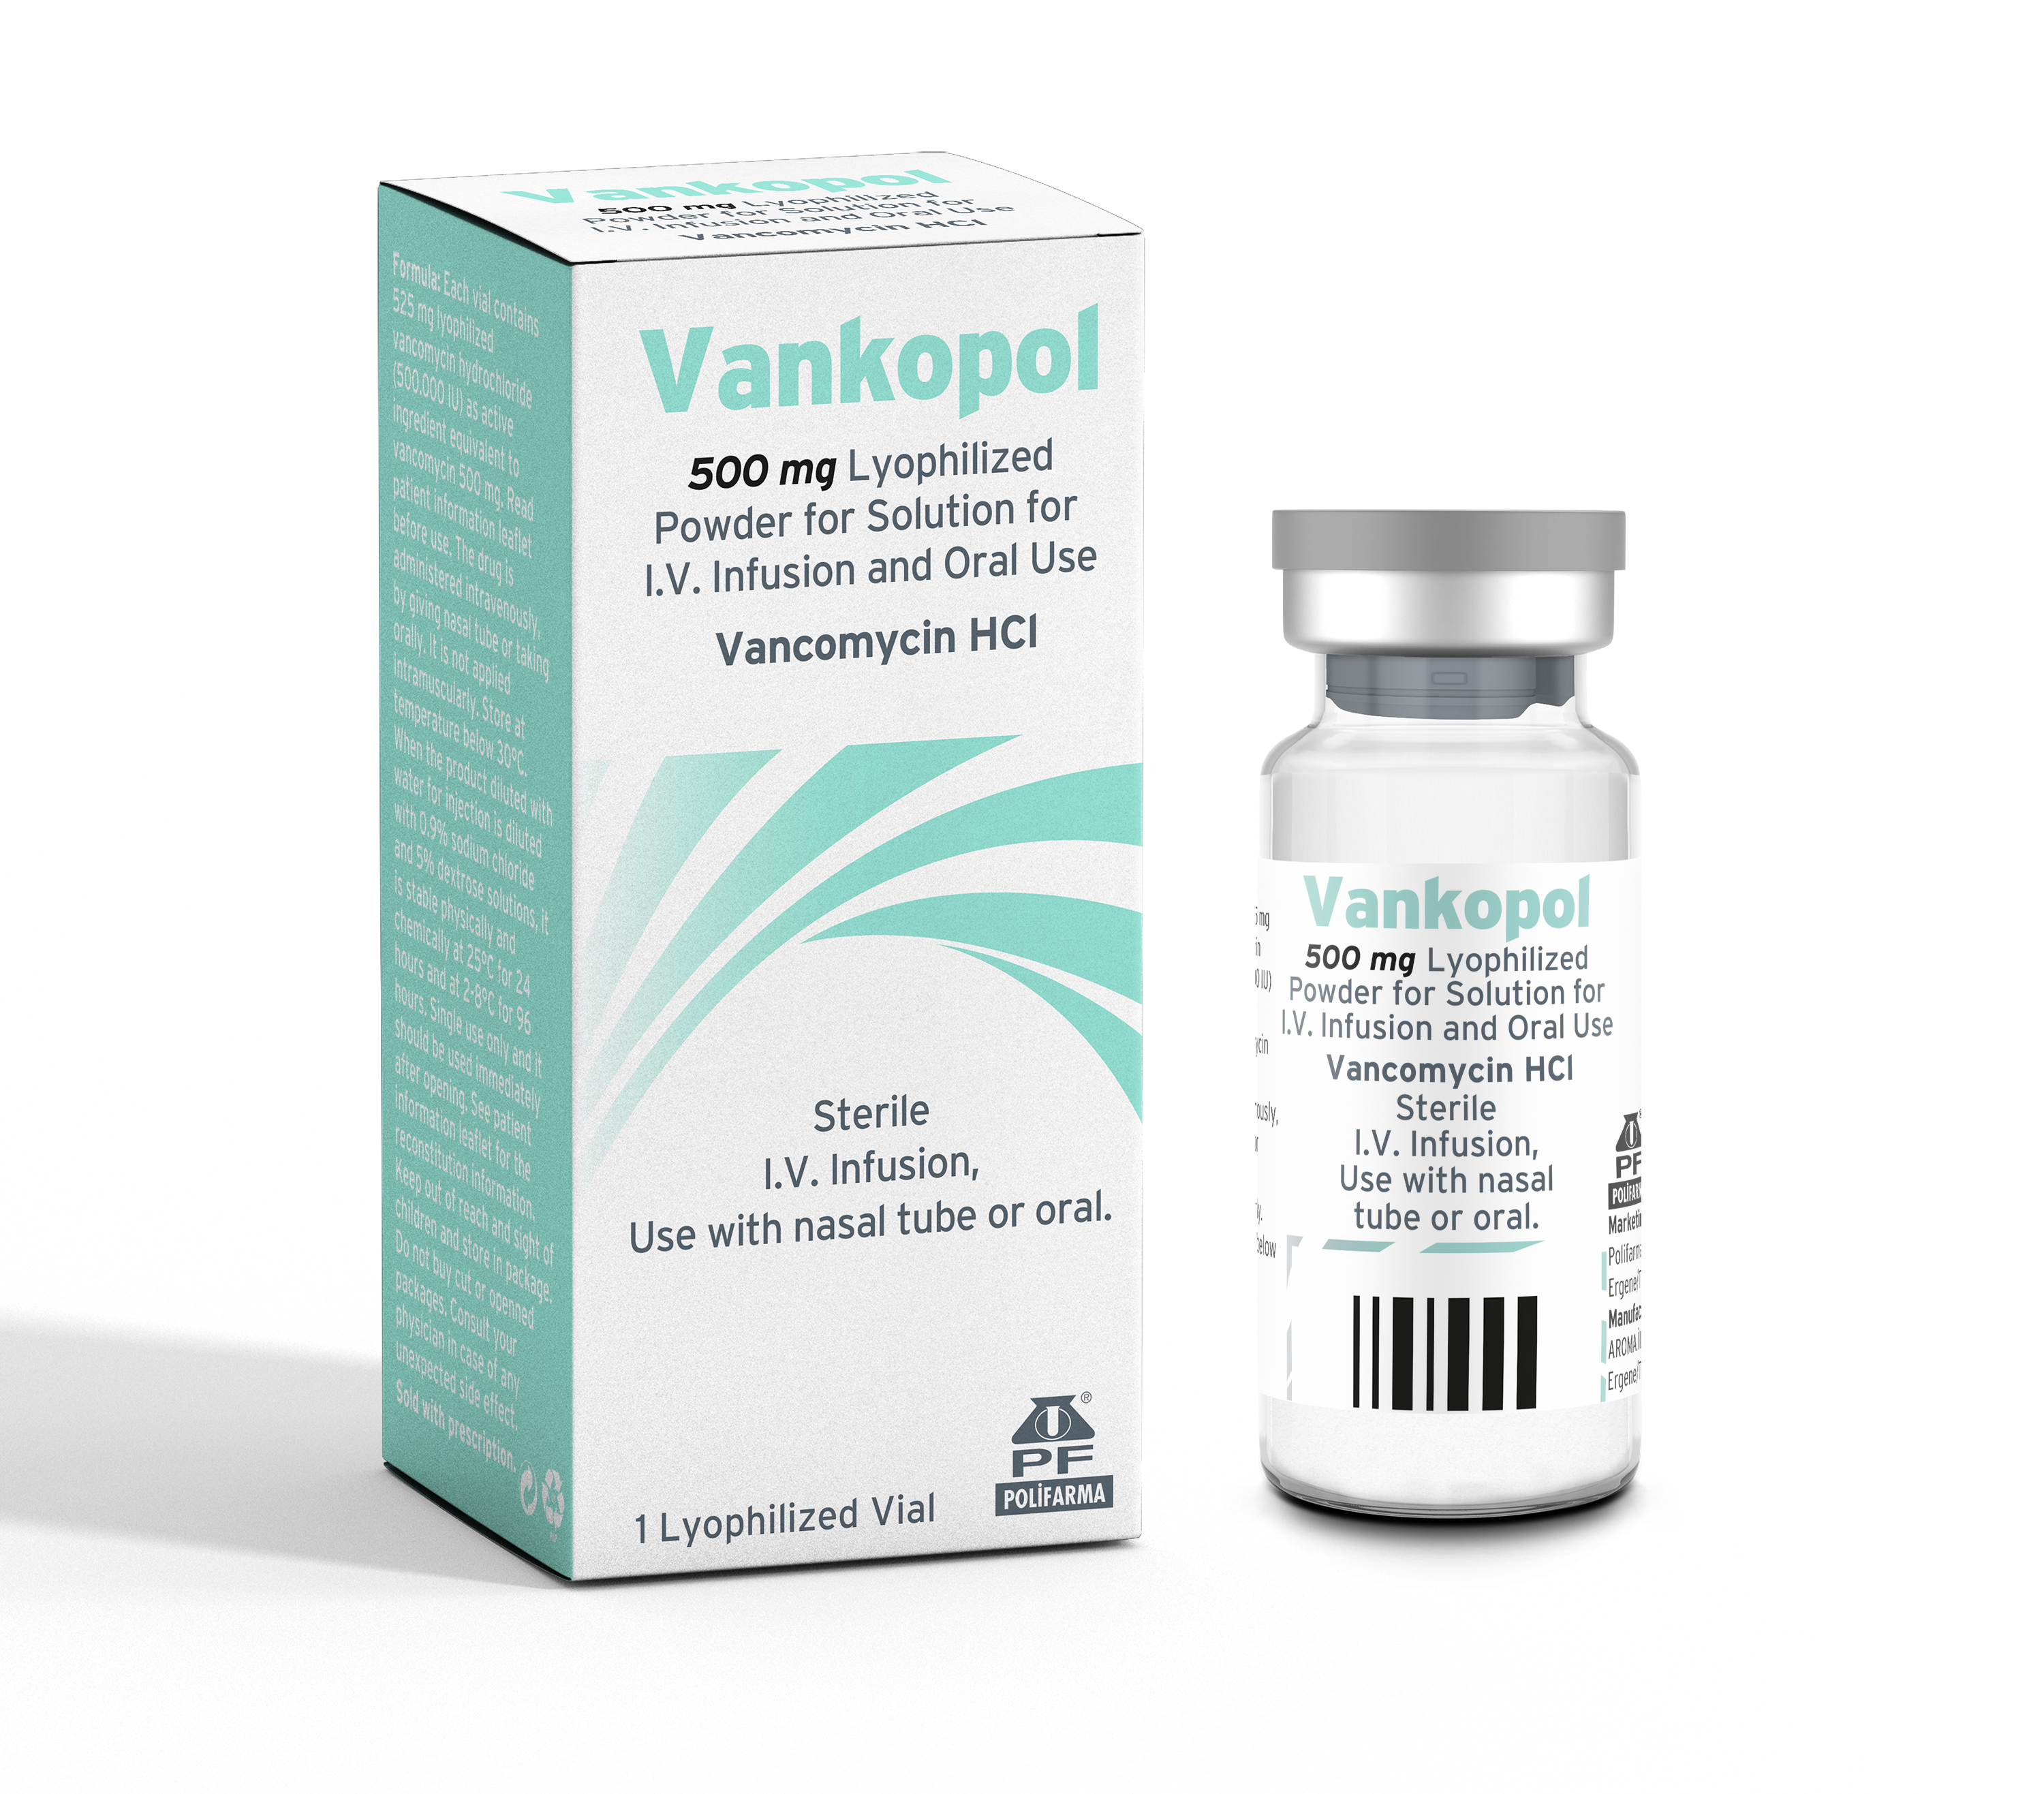 VANKOPOL 500 mg IV  Lyophilized powder for infusion and oral solution preparation - 1 vial